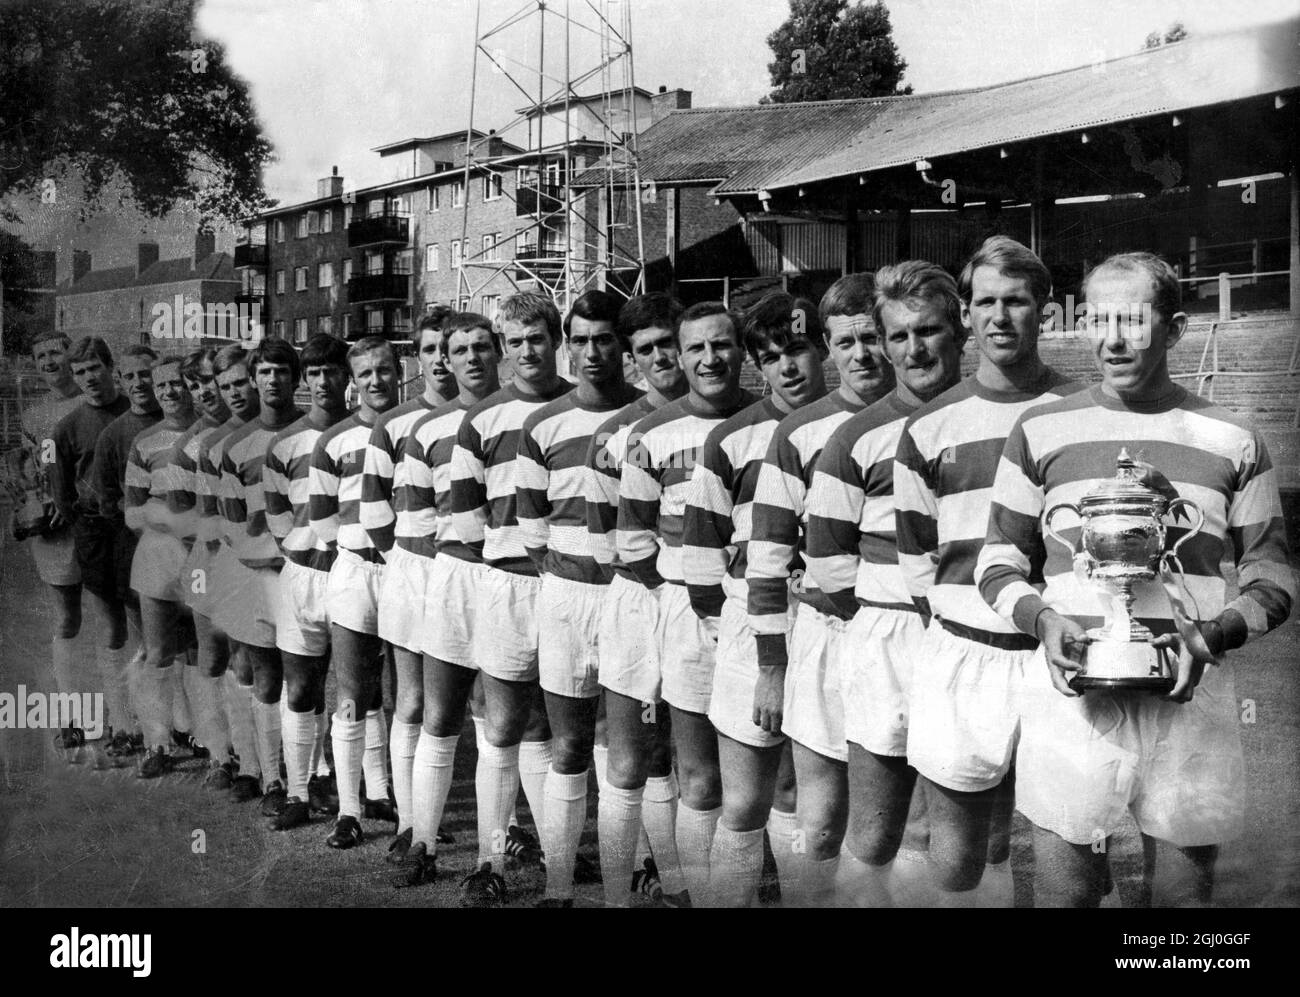 Queen's Park Rangers team line-up. Photo shows: (right - left) R. Sanderson (holding the third division trophy; M. Leach; B. Keetch; L. Allen; T. Hazell; M. Lazarus; C. Maughton; D. Clement; R. Marsh; R. Hunt; A. Wilks; A. Harris; R. Morgan; I. Morgan; B. Finch; I. Watson; J. Langley; R. Springett; M. Kelly; M. Keen (holding the football league cup) 20th July 1967 Stock Photo